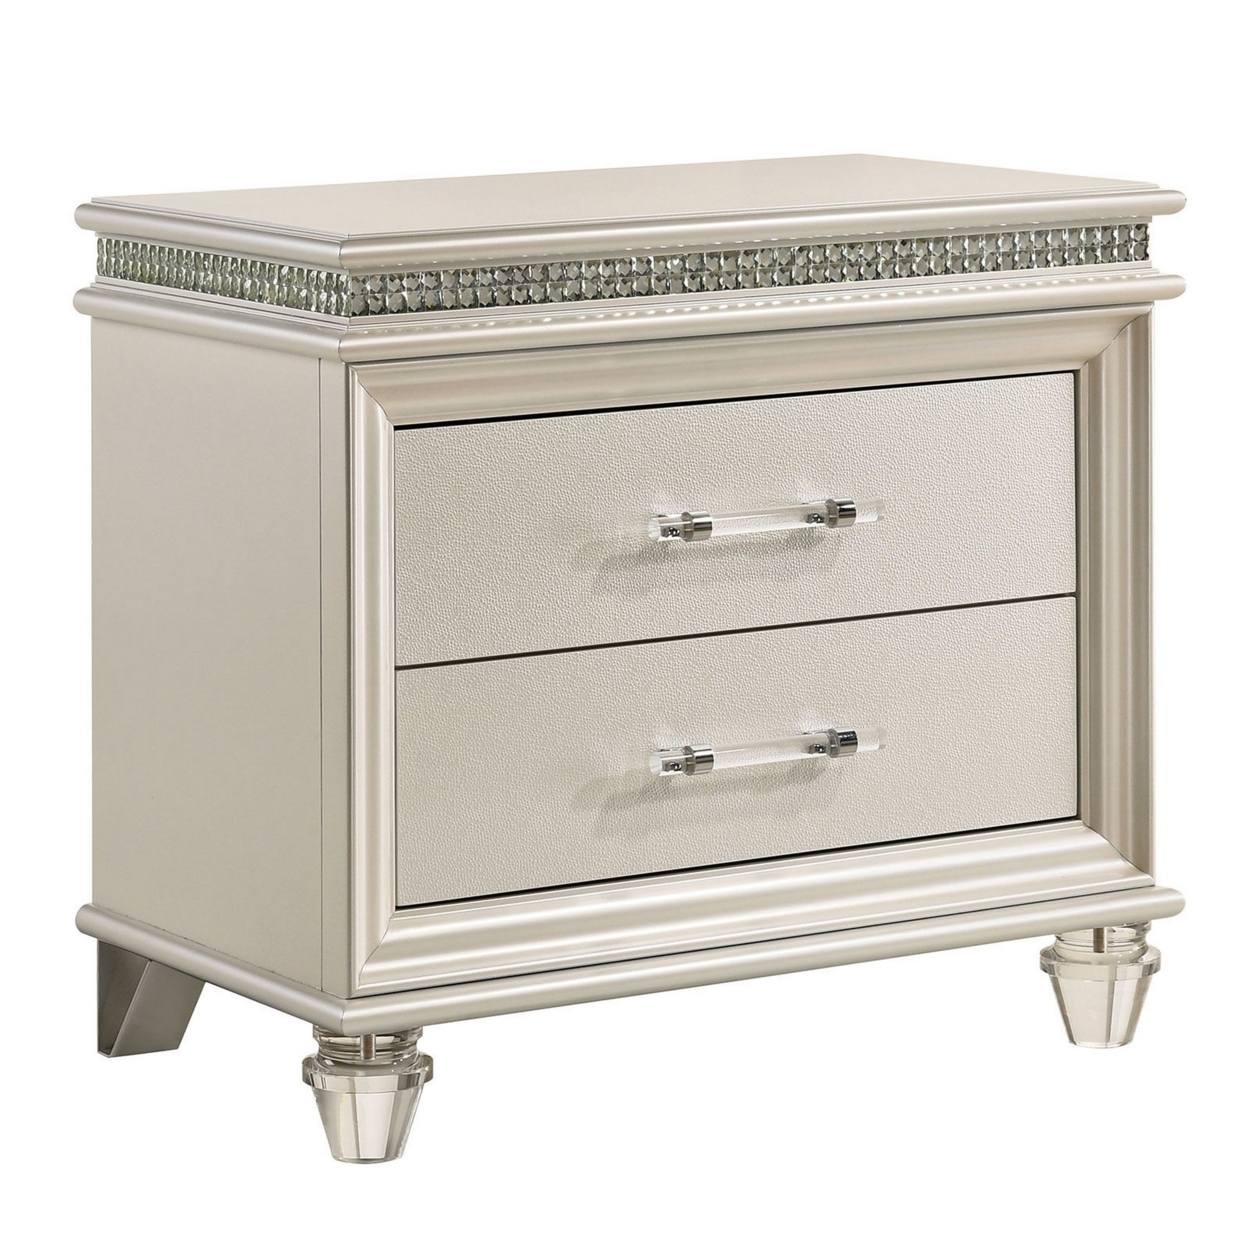 2 Drawer Nightstand With Acrylic Feet And Crystal Accents, Silver- Saltoro Sherpi